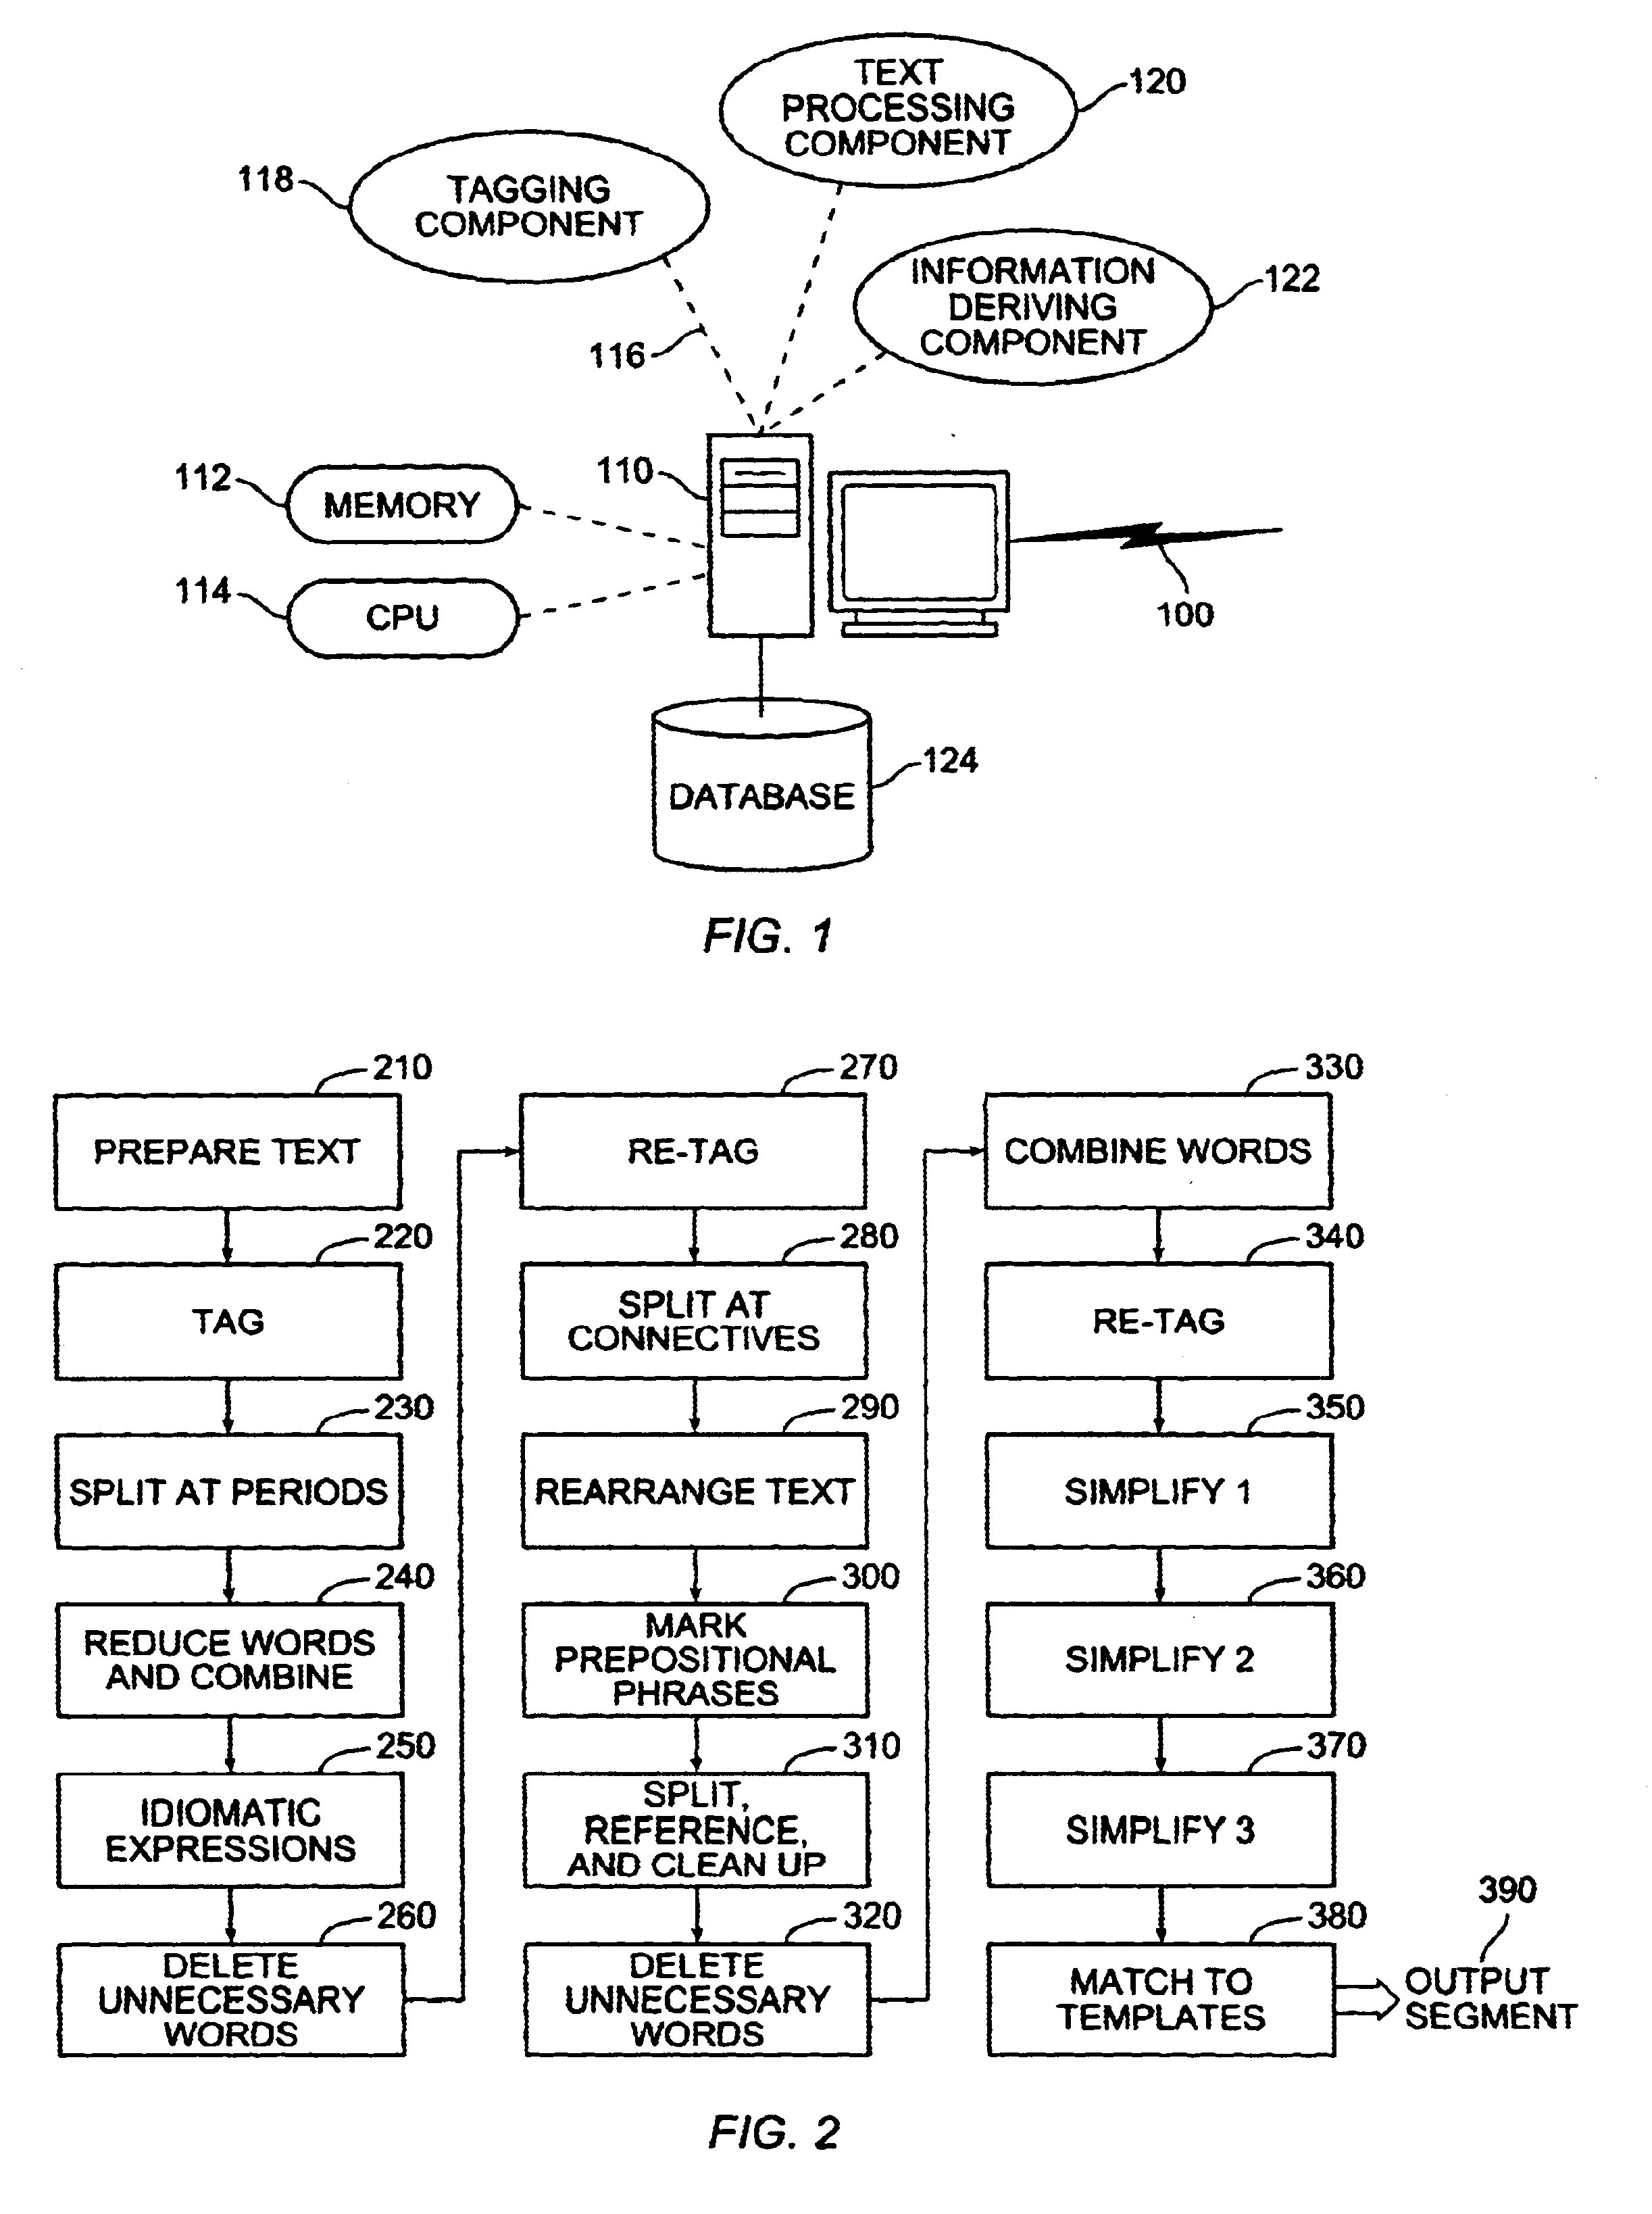 Method and system for text analysis based on the tagging, processing, and/or reformatting of the input text